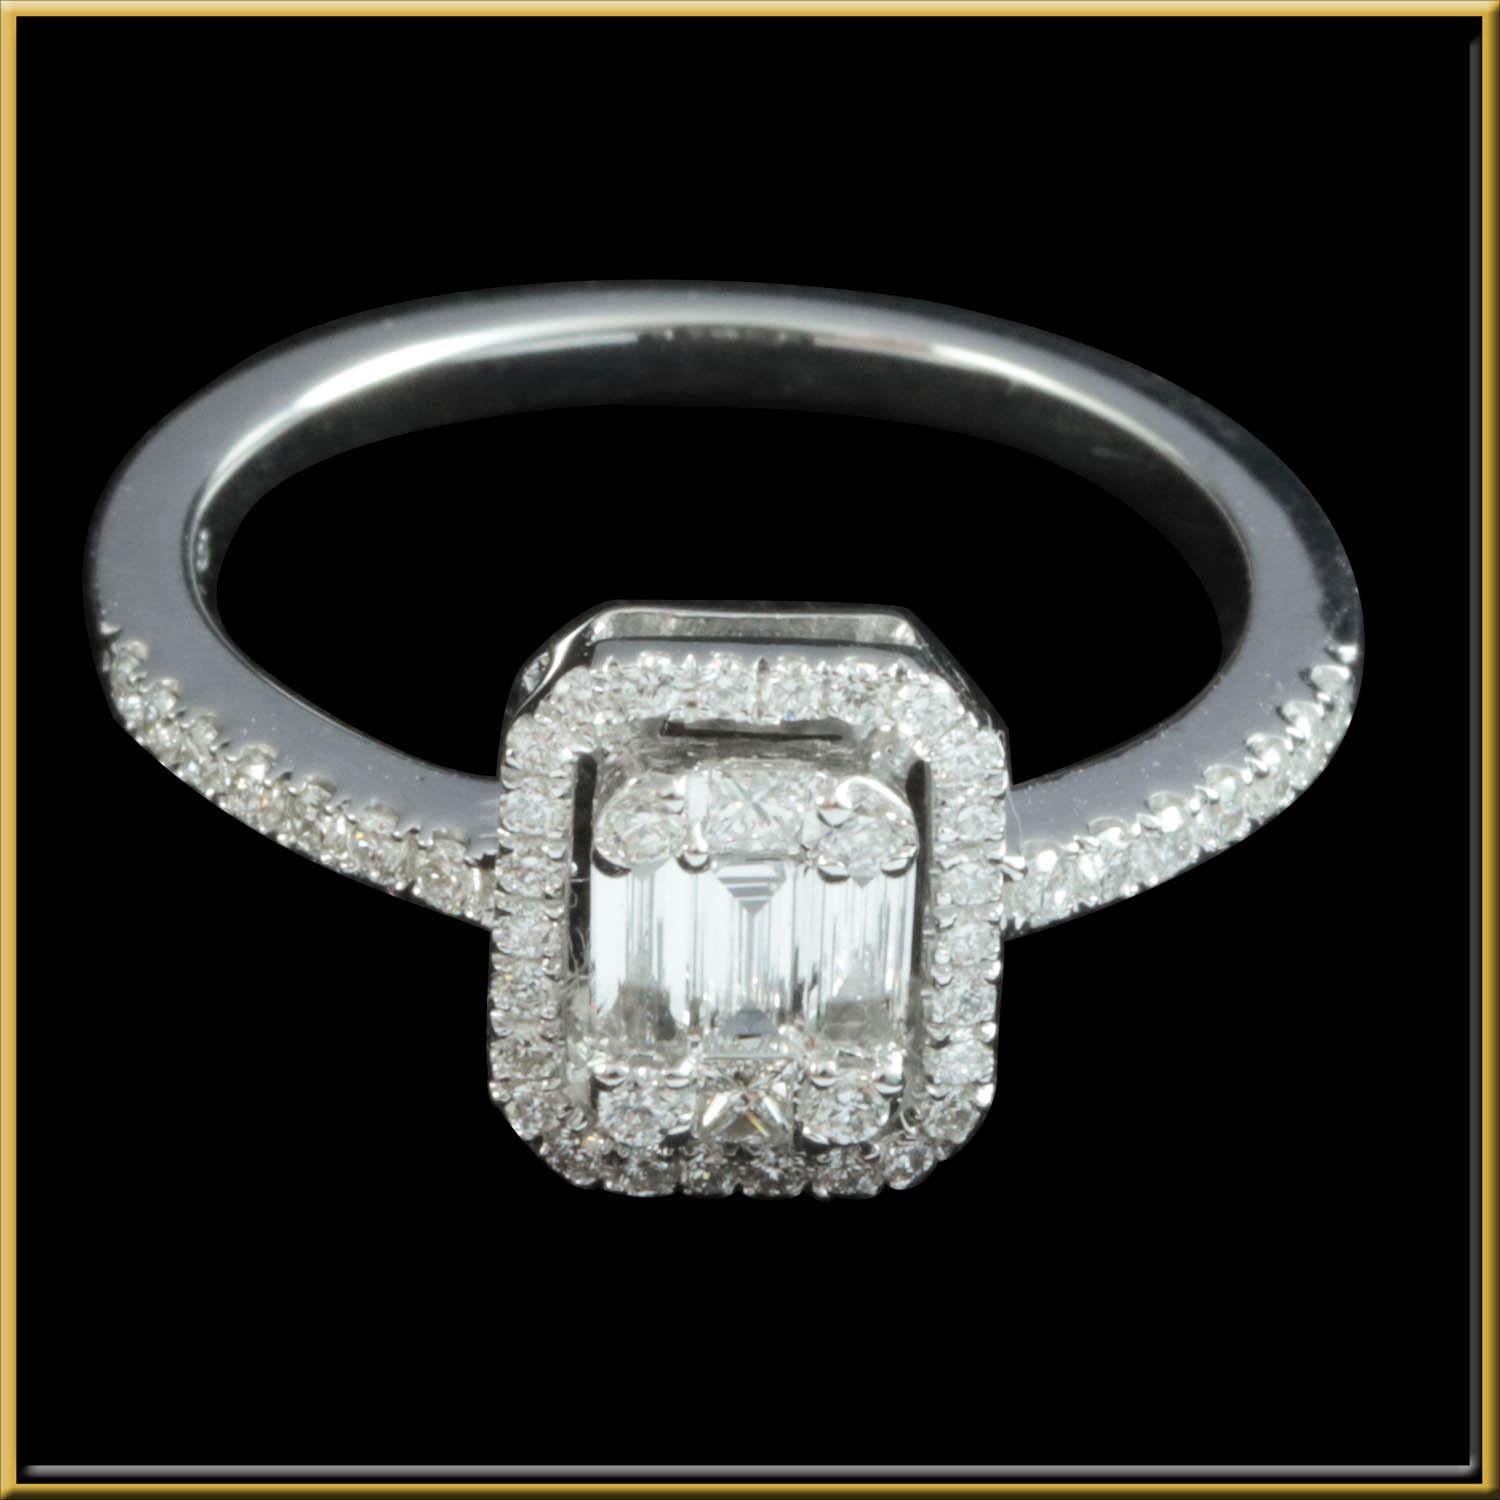 For Sale:  1ct Emerald Cut Diamond Illusion Engagement Ring Set in 18kt Gold 3